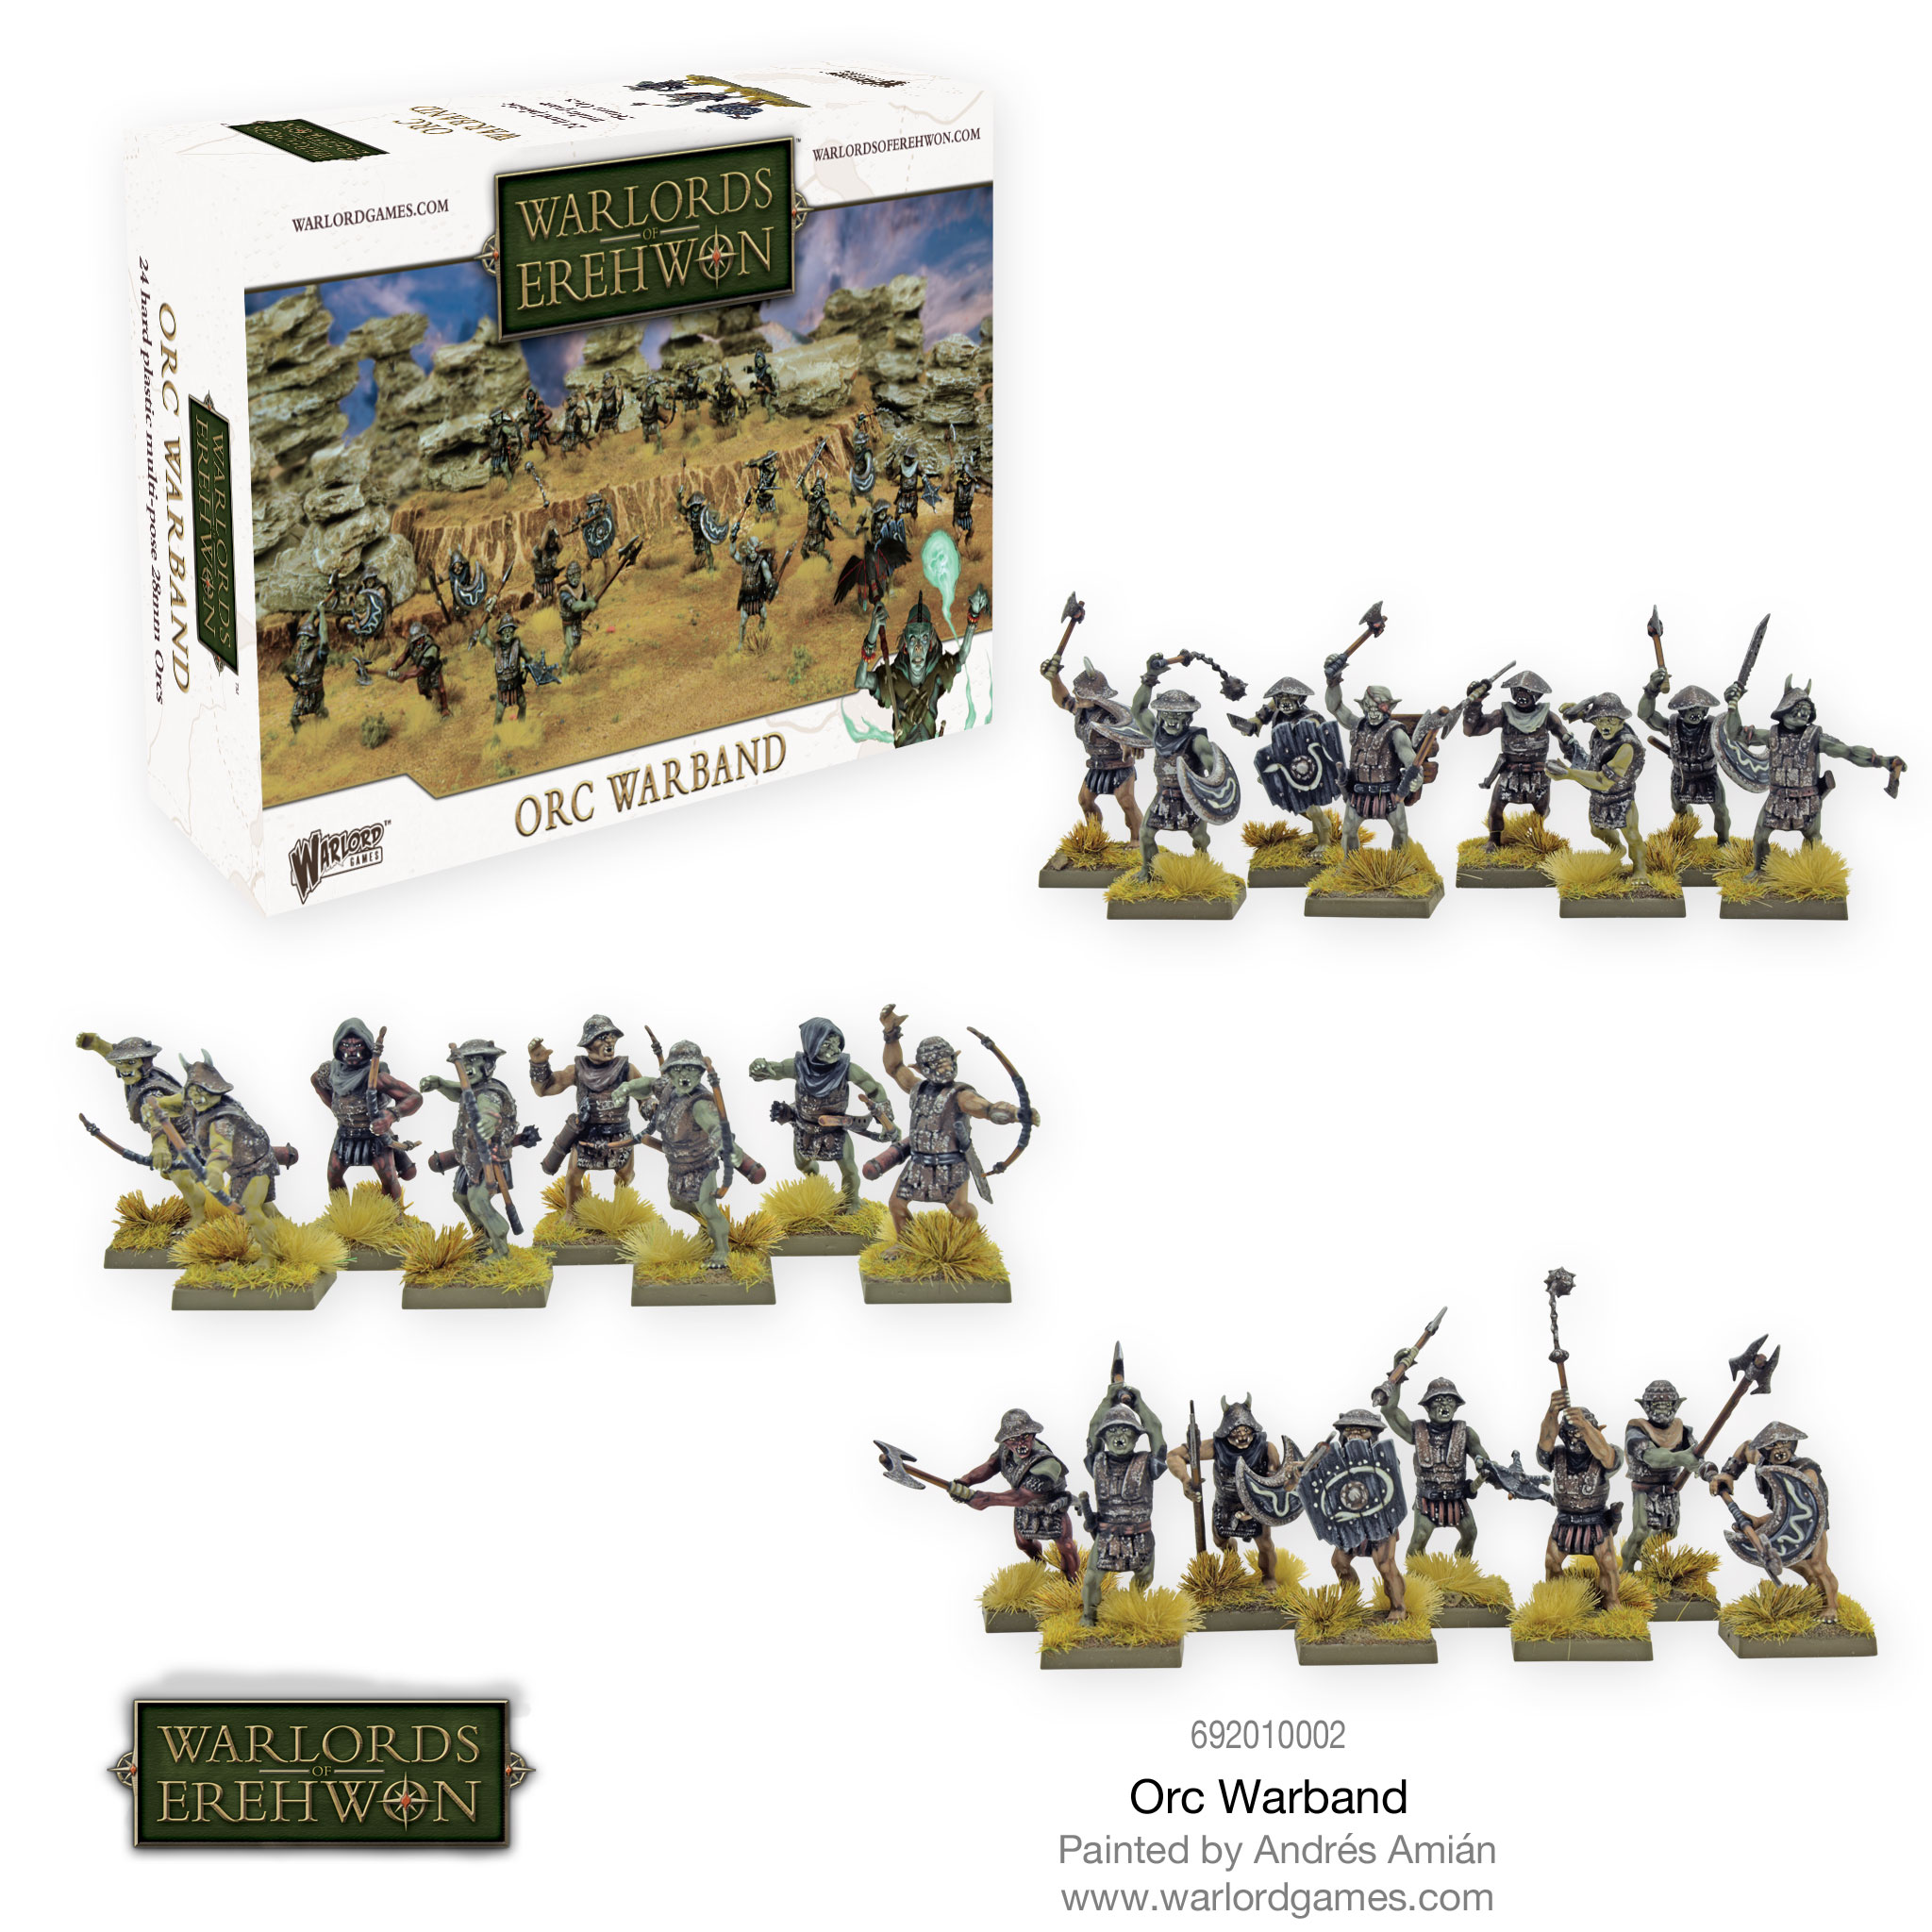 Azbad's Orc Horde Warlord Games Brand New WGWE-692012001 